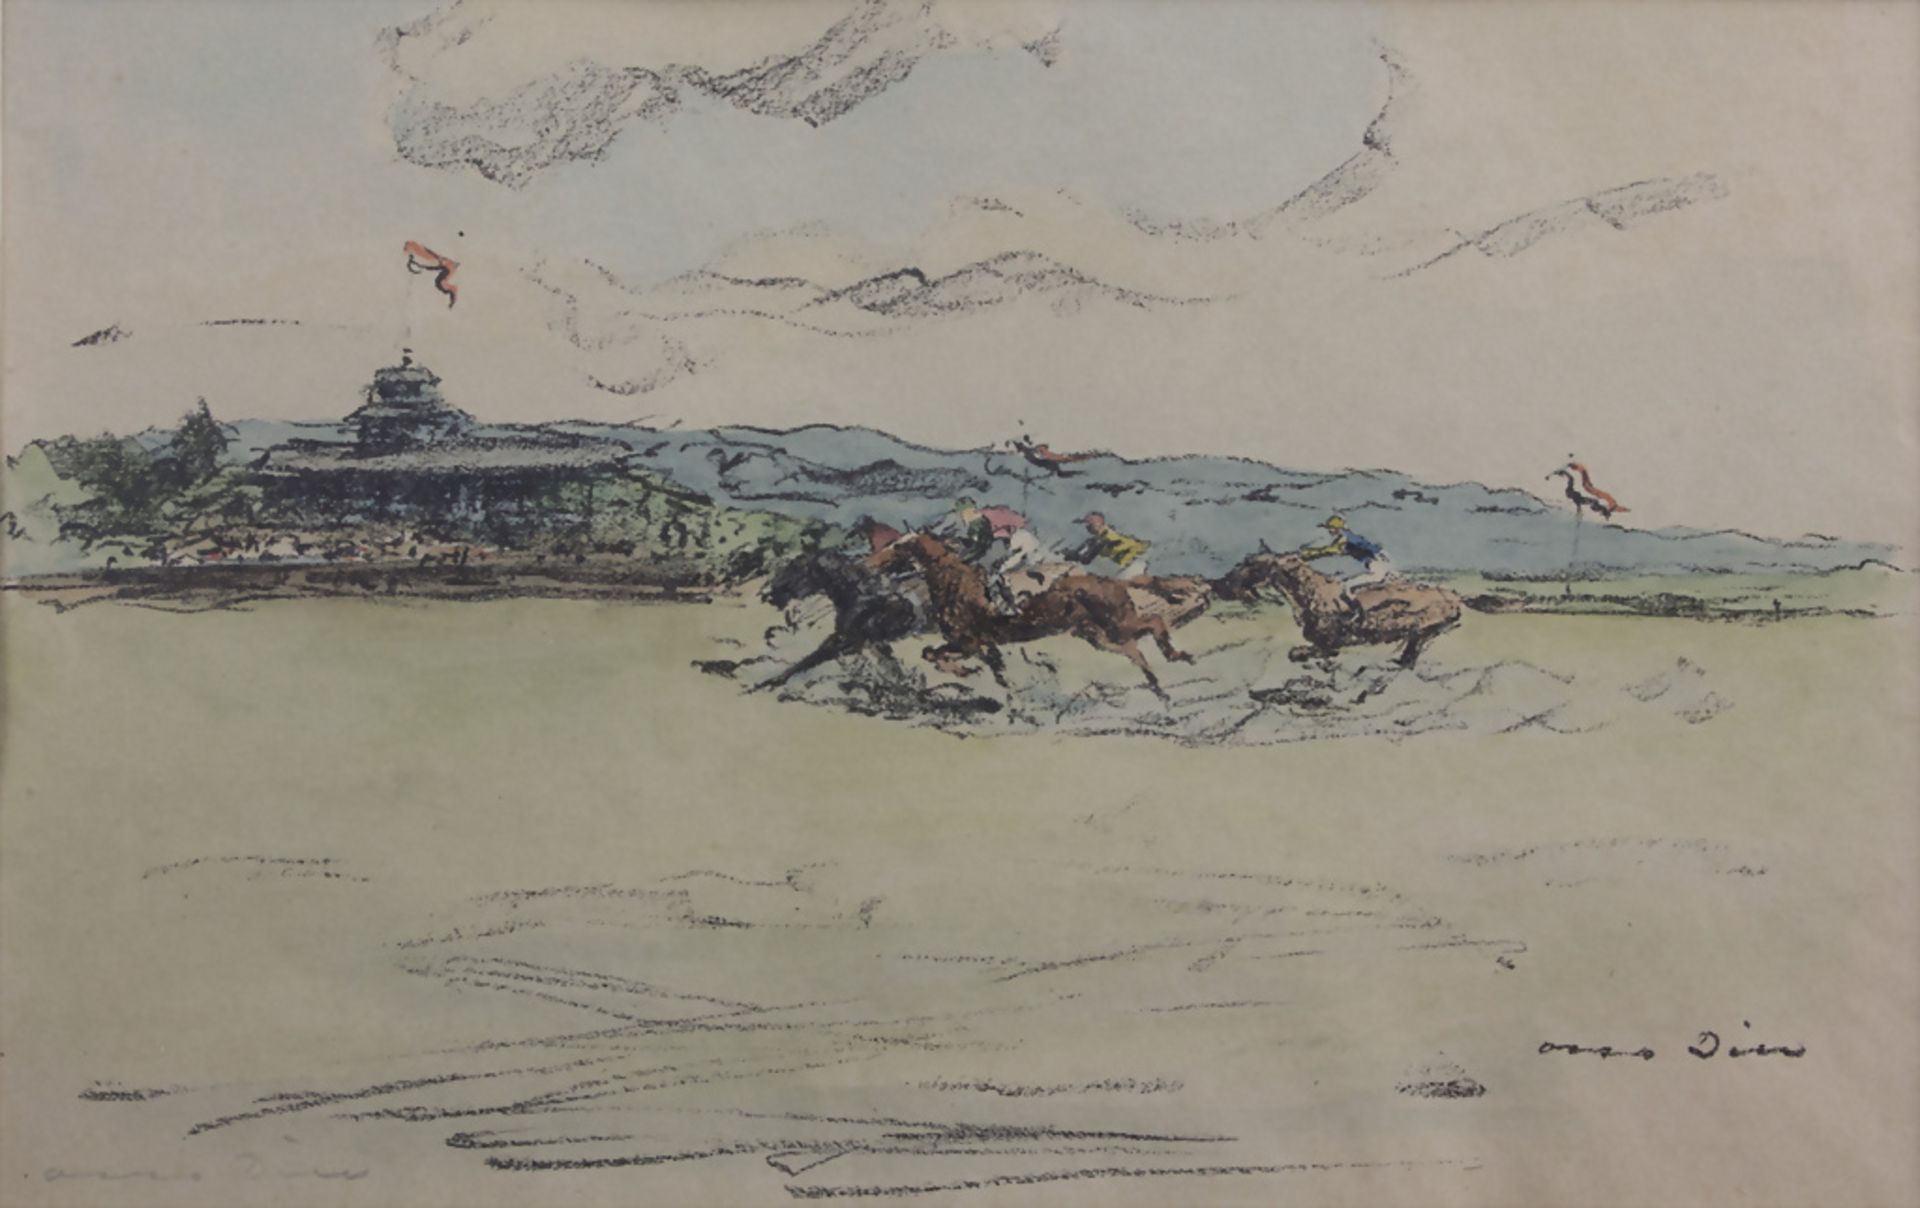 Otto Dill (1884-1957), 'Pferderennen' / 'A horse racing', 1. Hälfte 20. Jh.